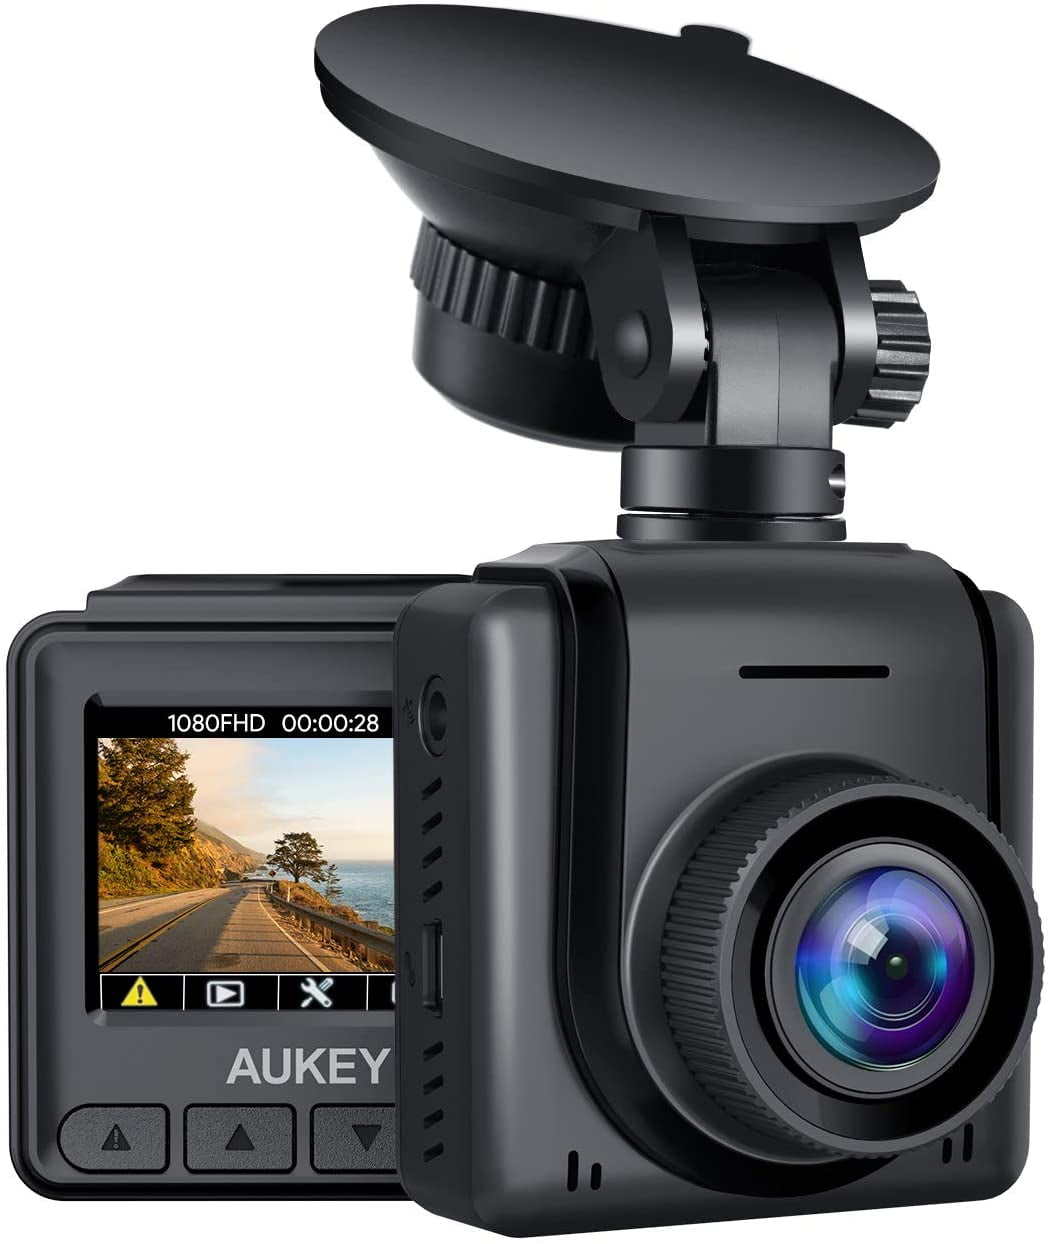 bros twist meerderheid AUKEY Mini Dash Cam 1080p Full HD Dash Camera with 1.5” LCD Screen Car  Camera with 170° Wide-Angle Lens, G-Sensor, WDR, Motion Detection, and  Clear Night Recording - Walmart.com